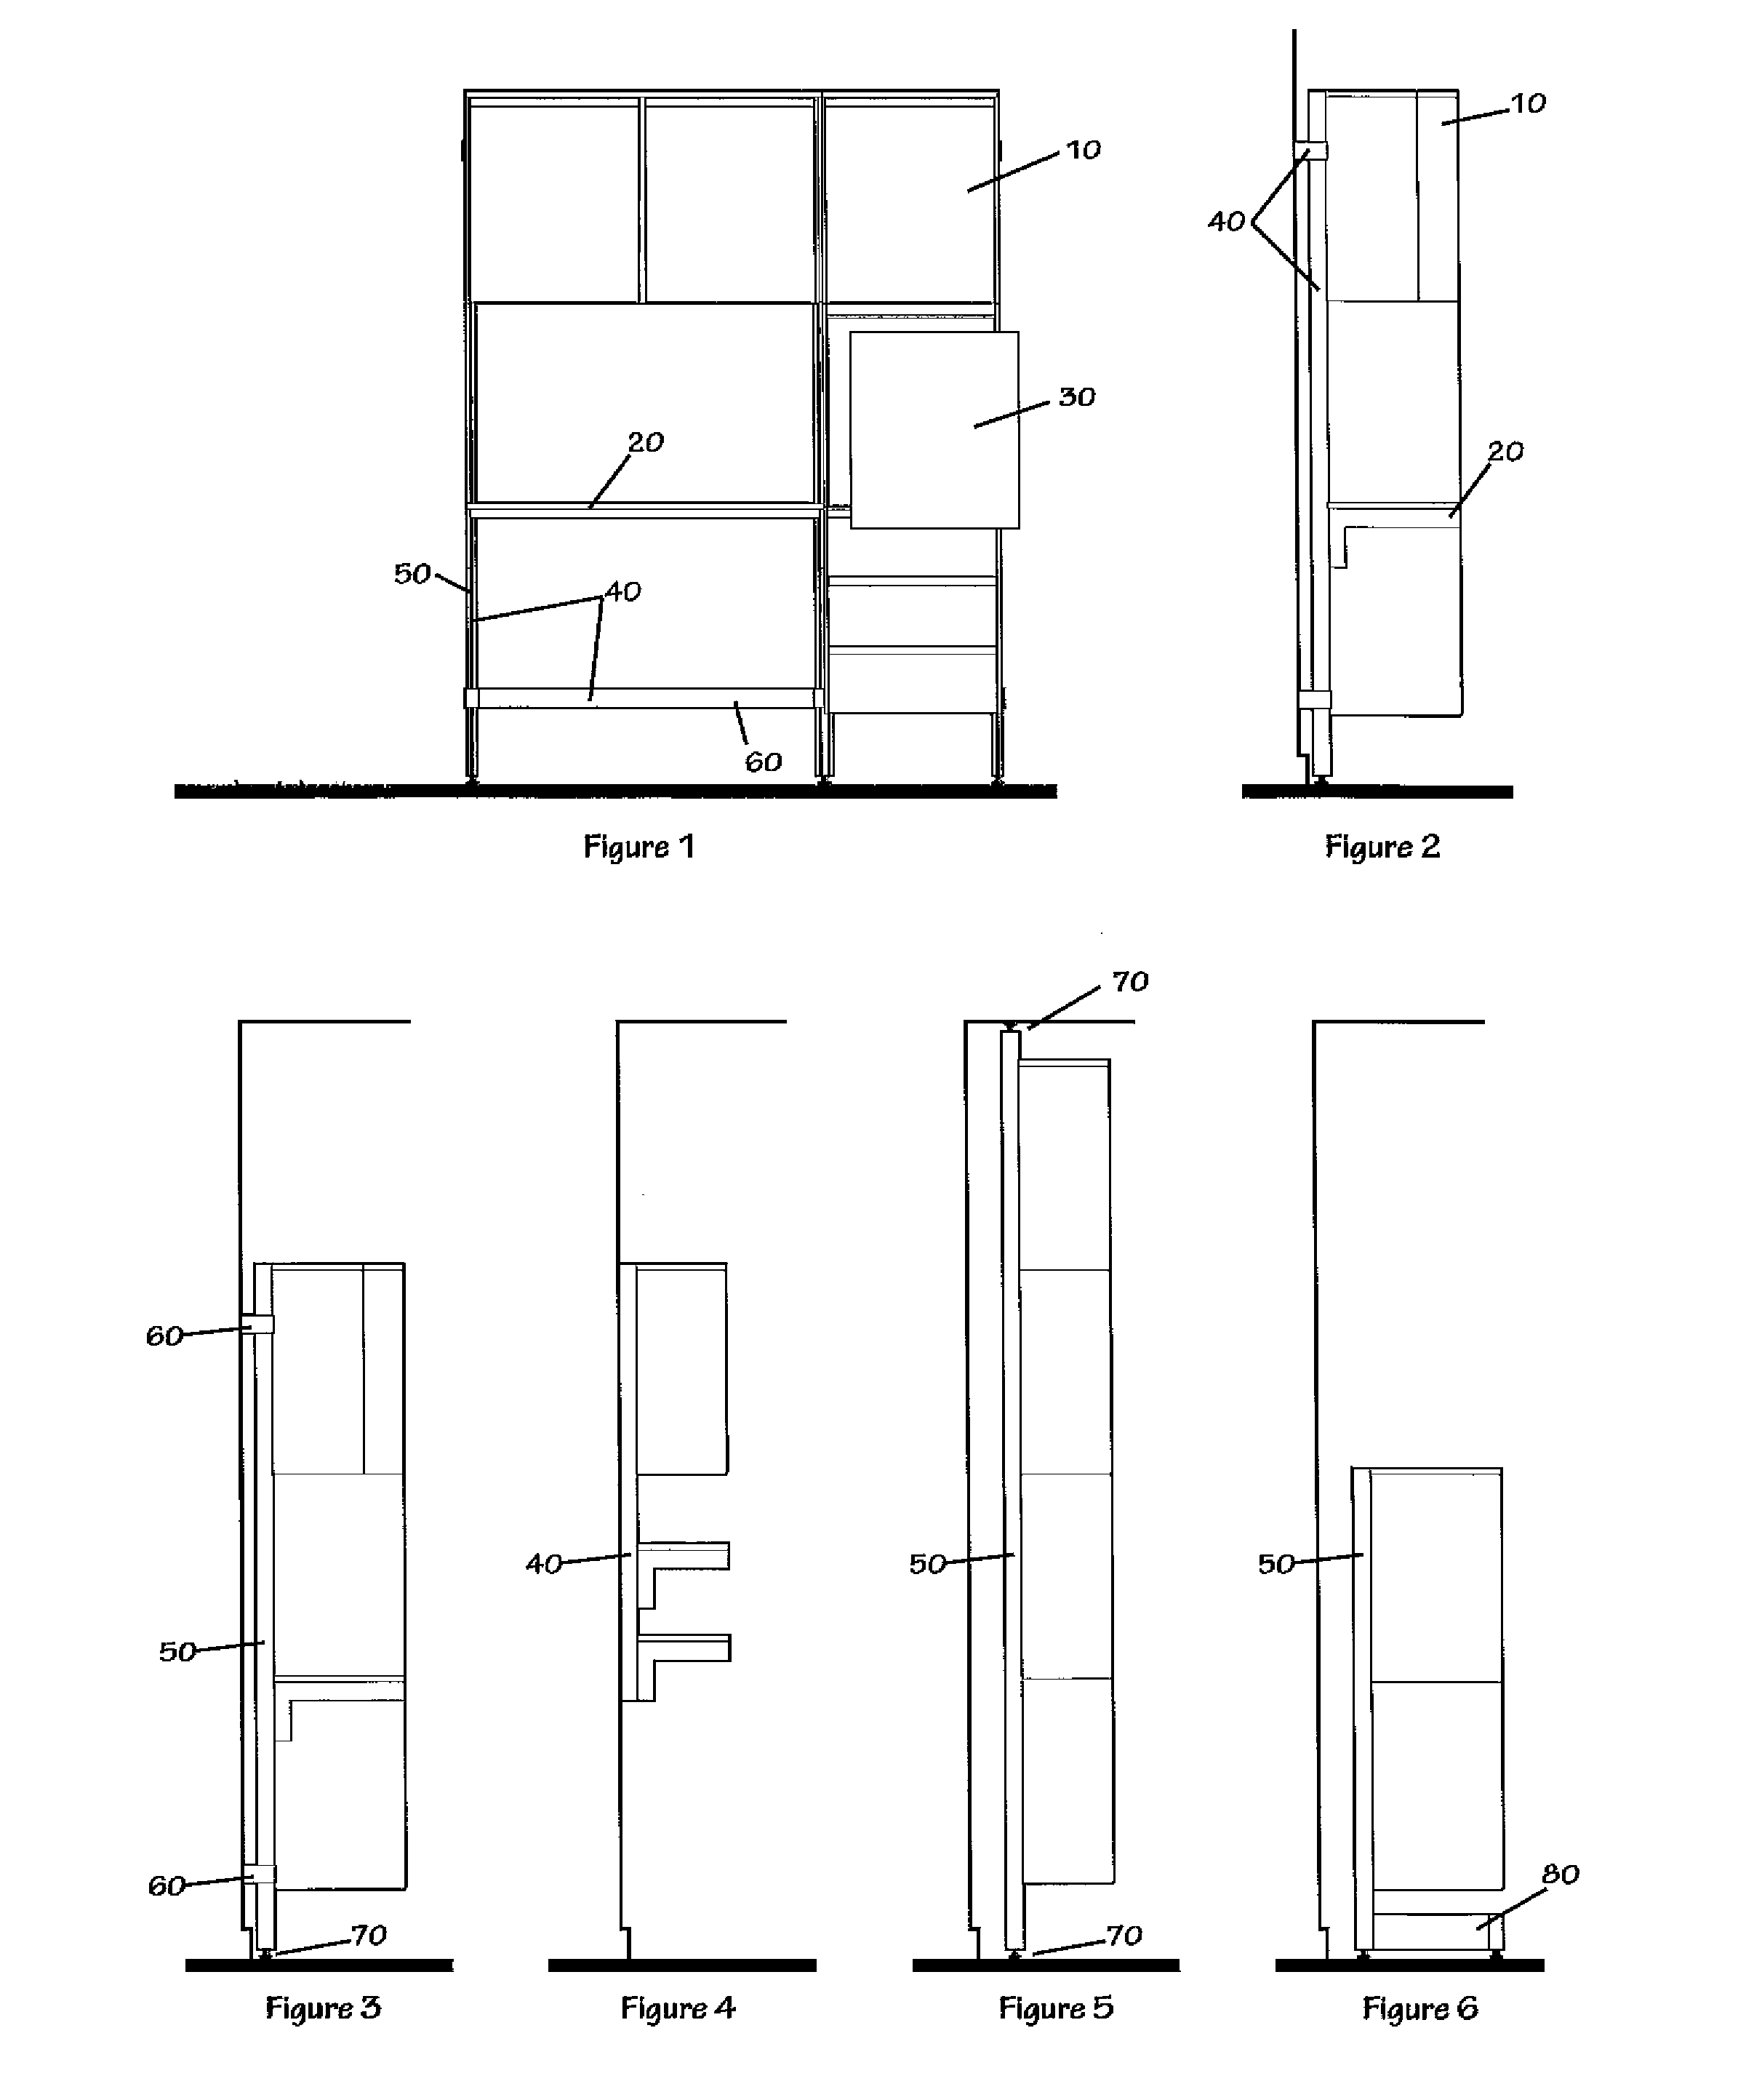 Storage furniture system and methods for assembling the storage furniture system